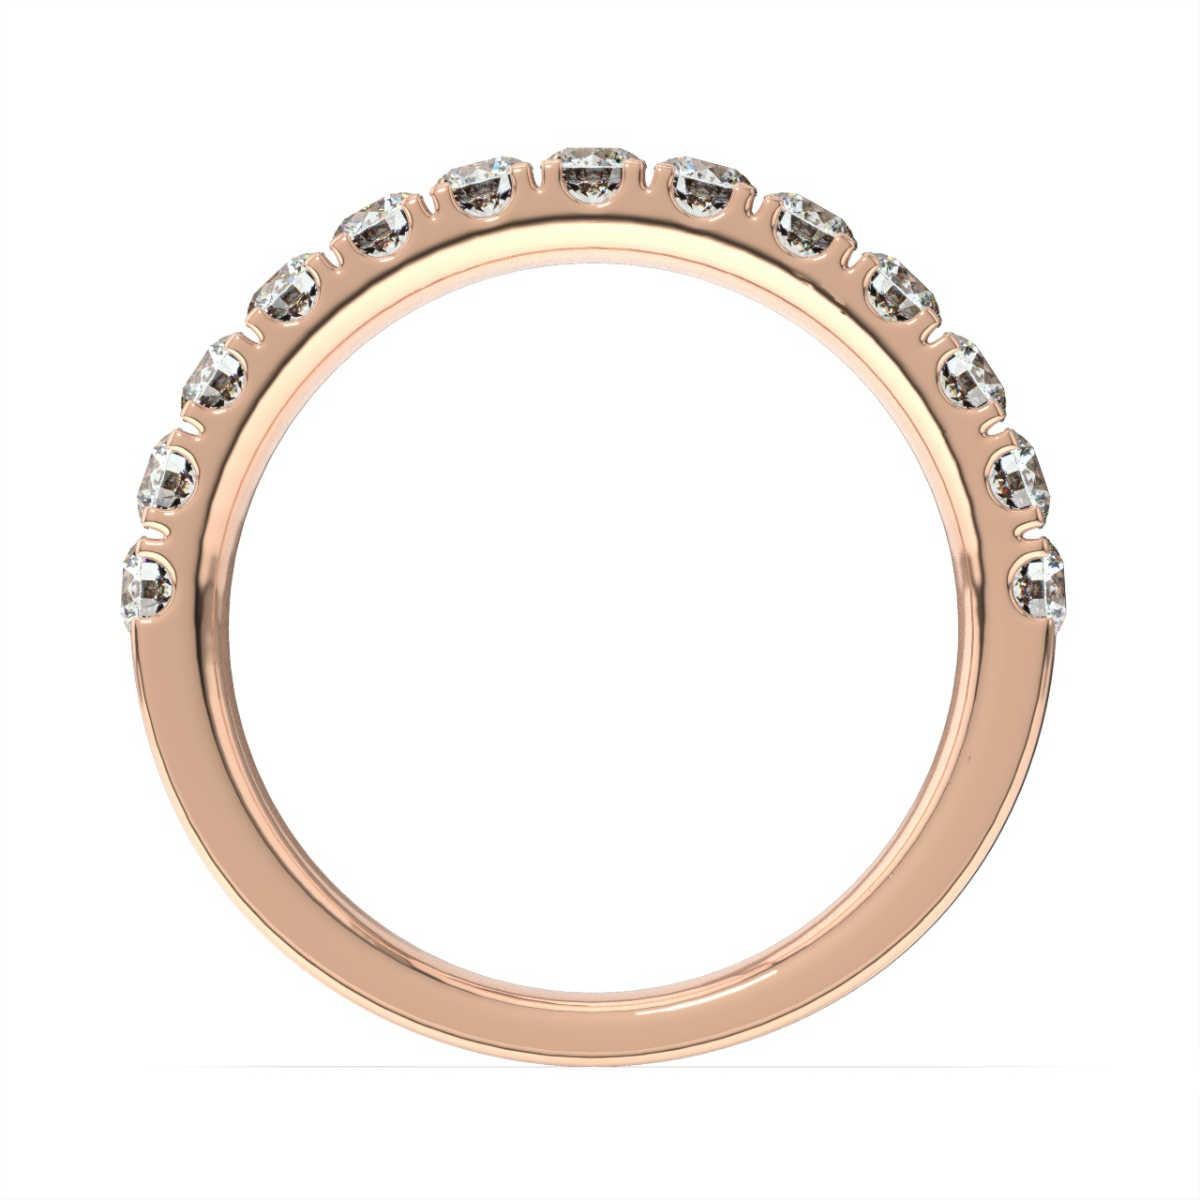 This ring features 13 perfectly matched round brilliant diamonds micro-prong set. Experience the difference!

Product details: 

Center Gemstone Color: WHITE
Side Gemstone Type: NATURAL DIAMOND
Side Gemstone Shape: ROUND
Metal: 14K Rose Gold
Metal